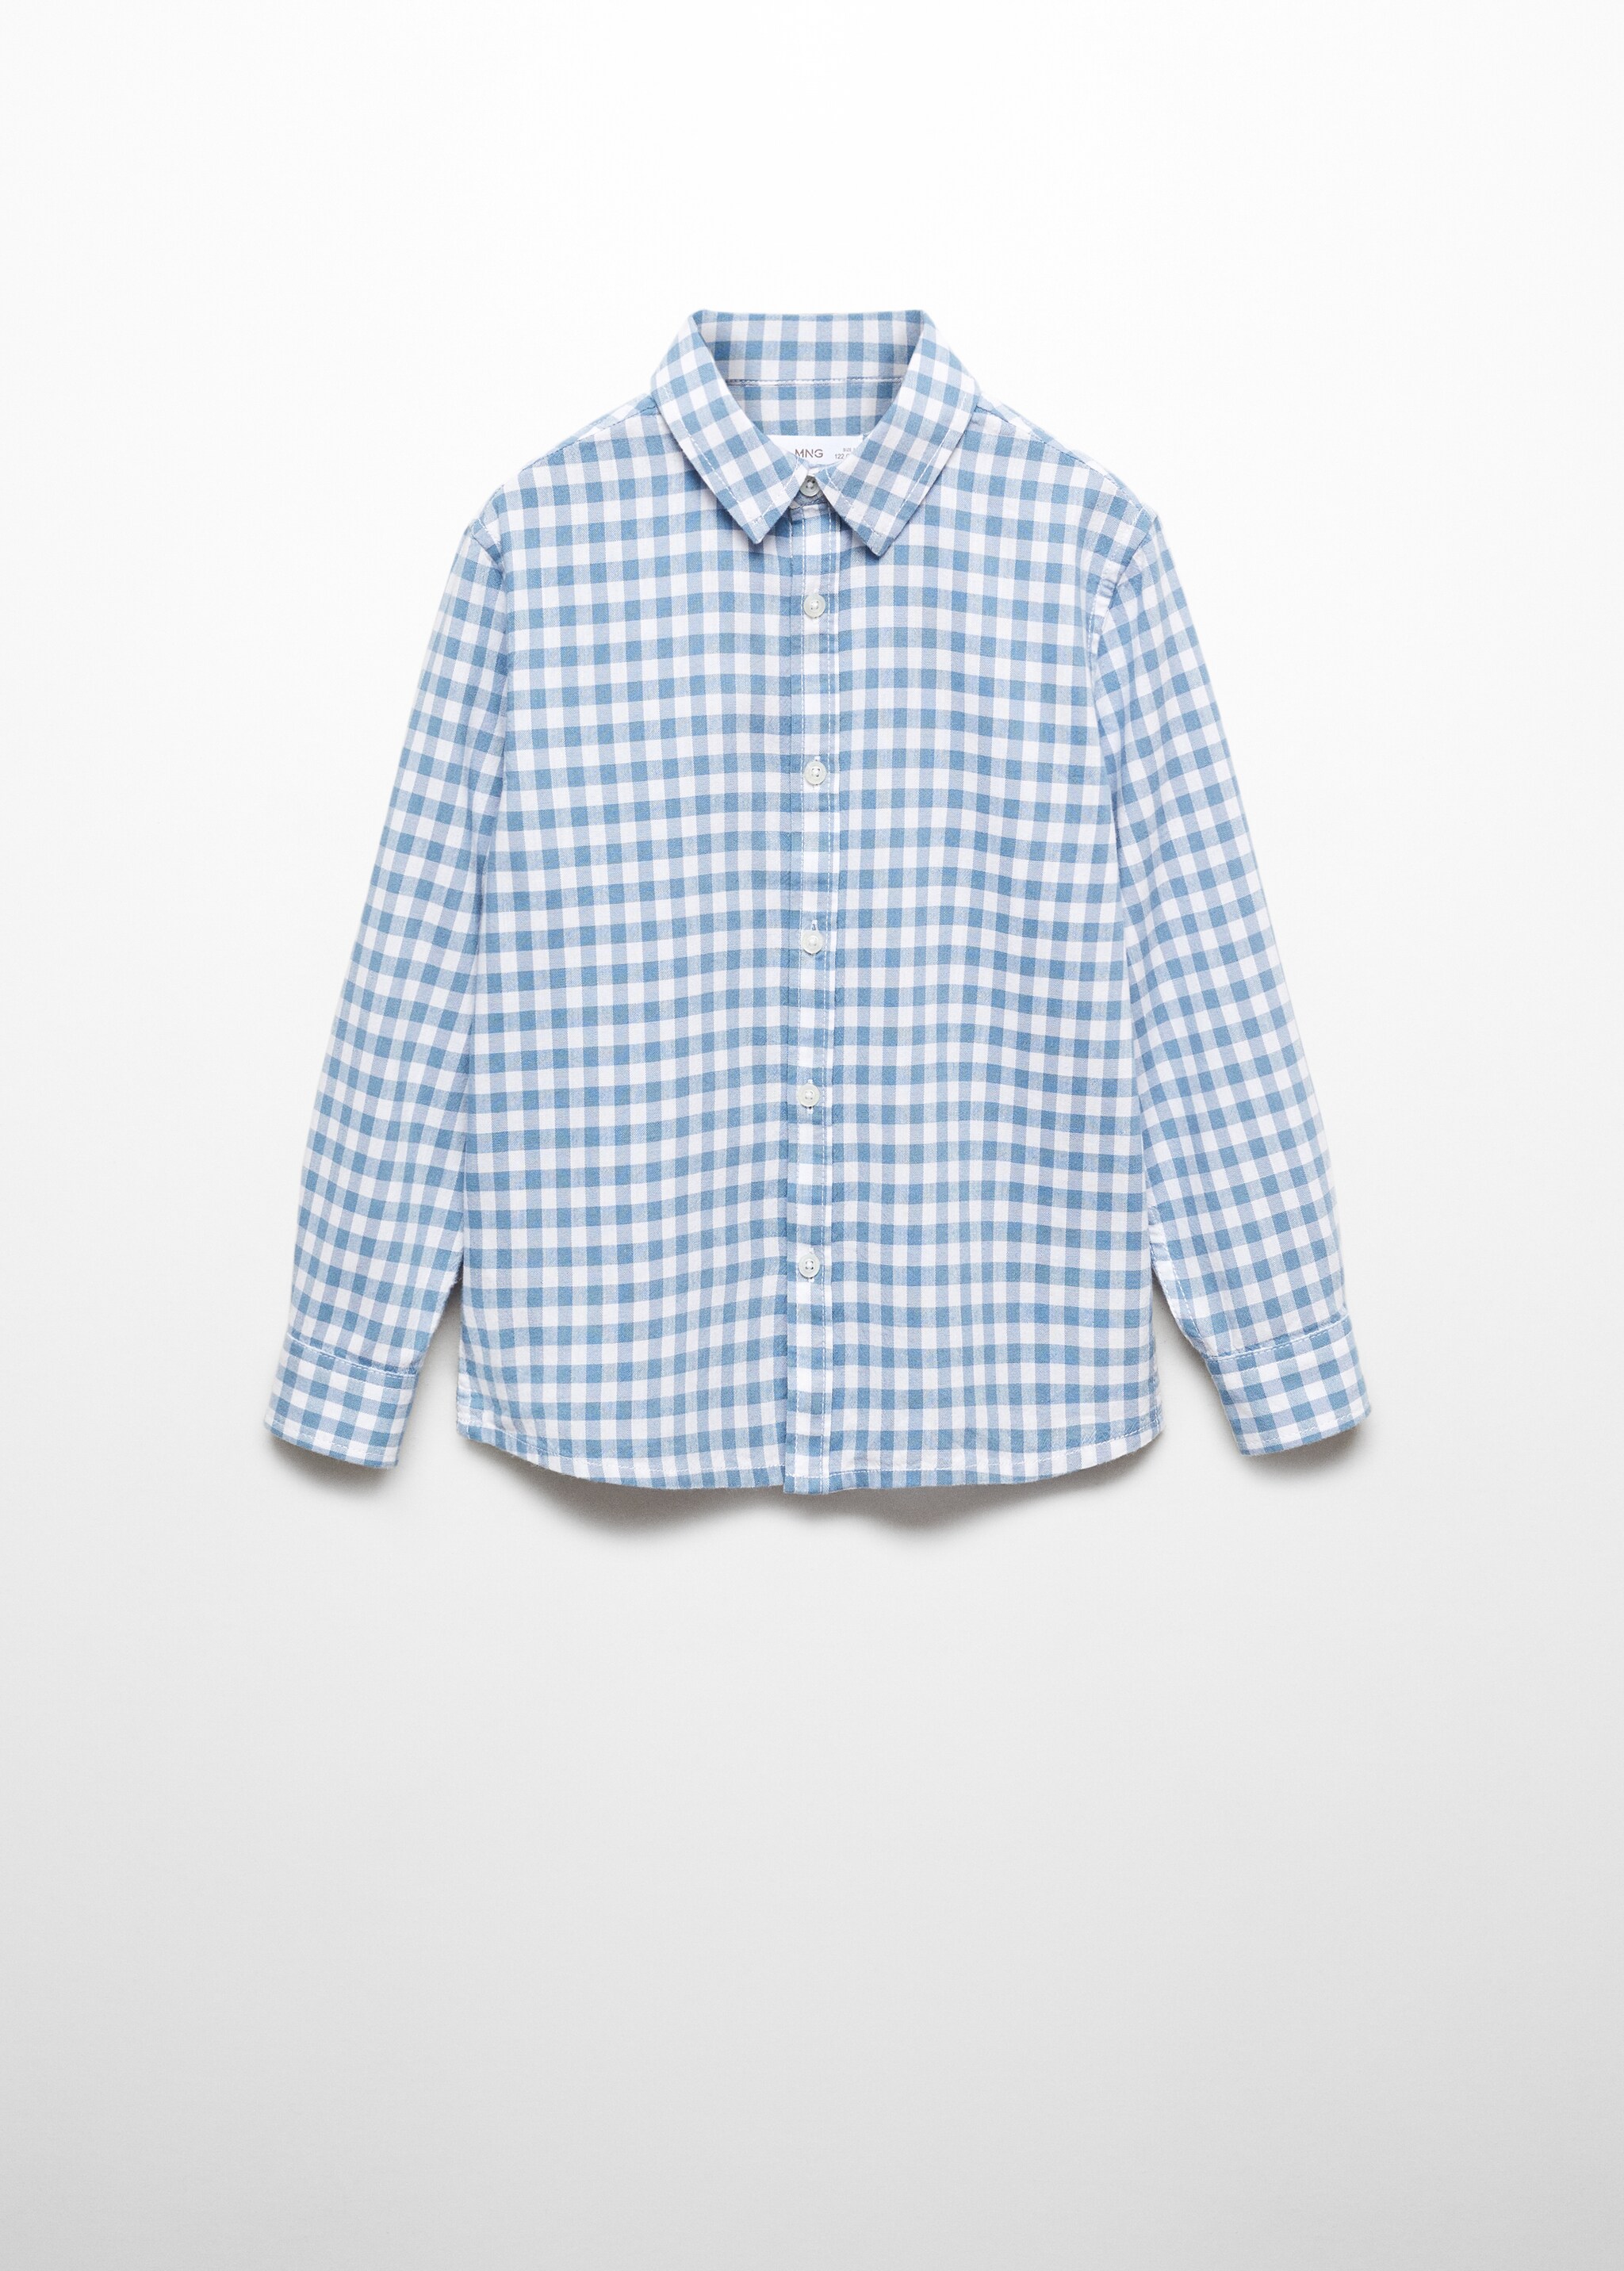 Gingham check cotton shirt - Article without model